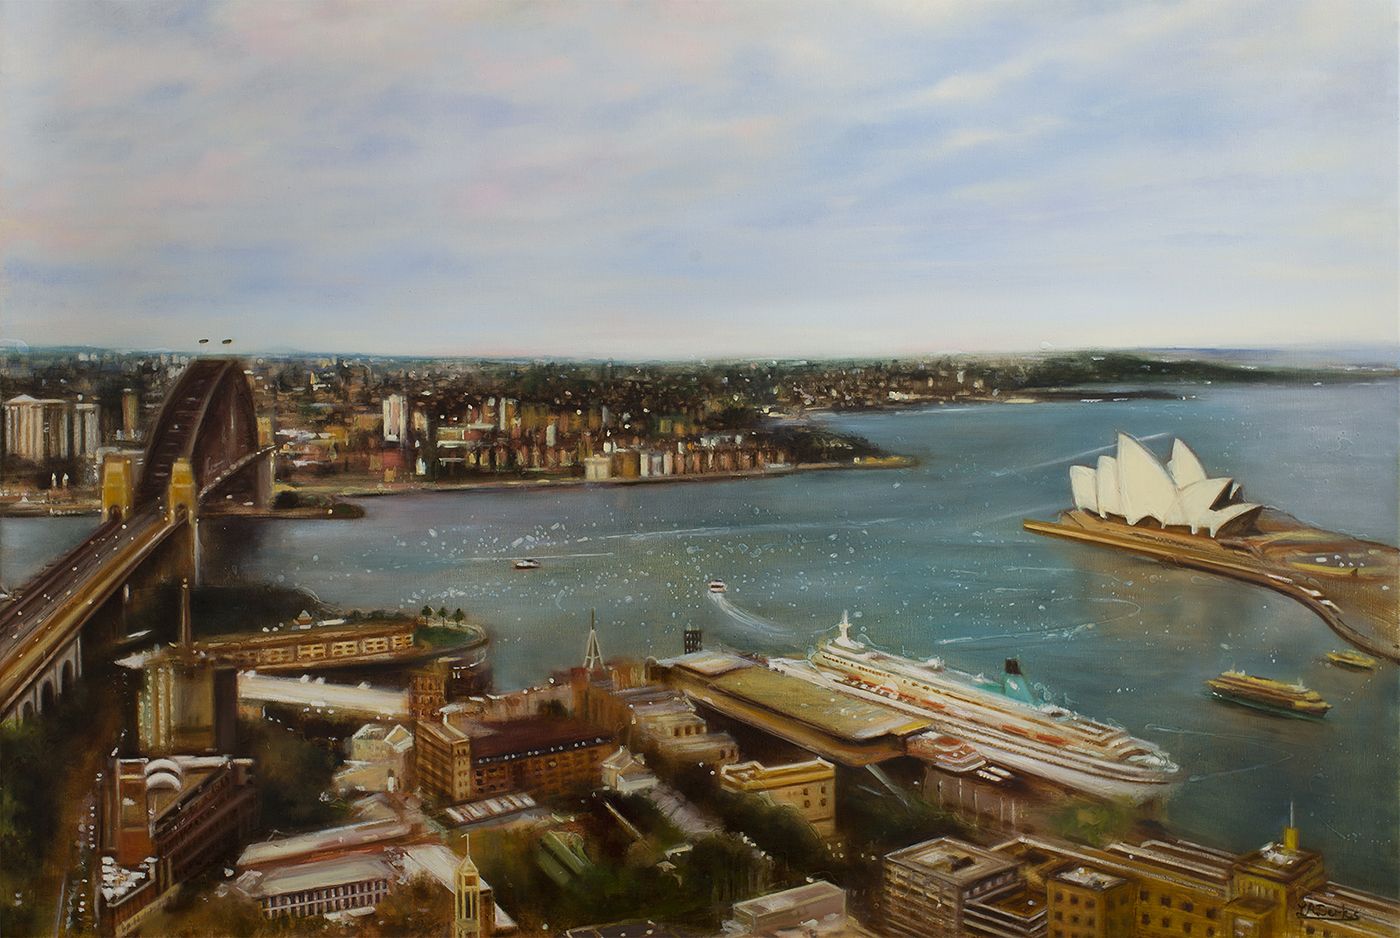 Sydney by Day by Lesley Anne Derks